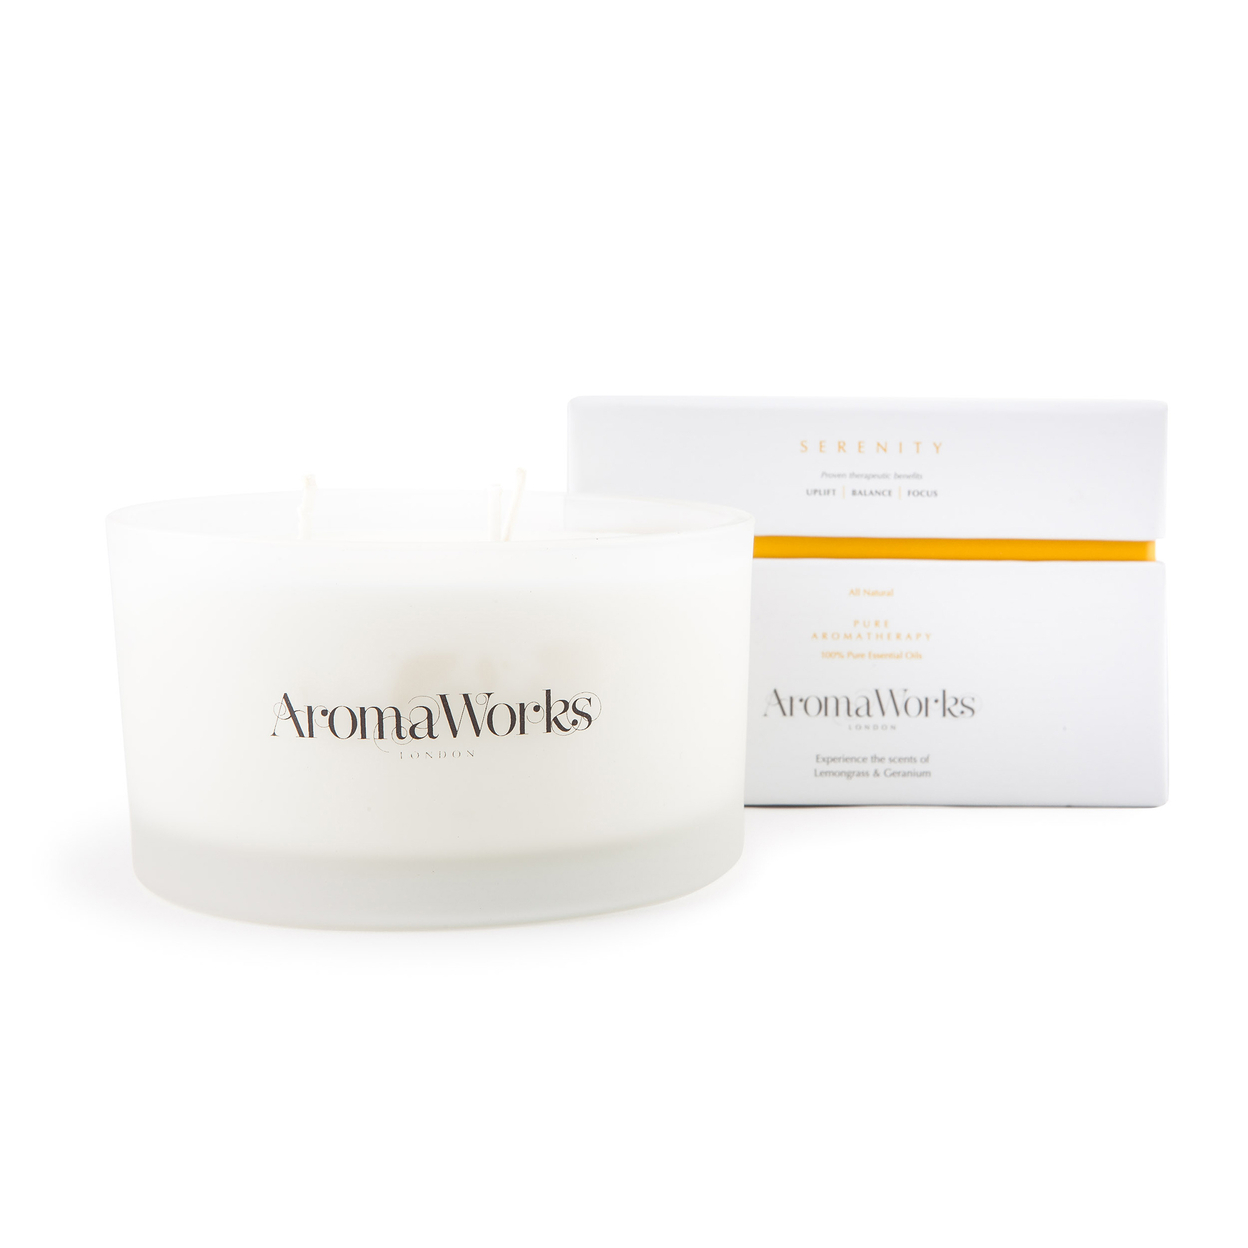 Aromaworks Serenity Candle 3 Wick Large 14.1 Oz